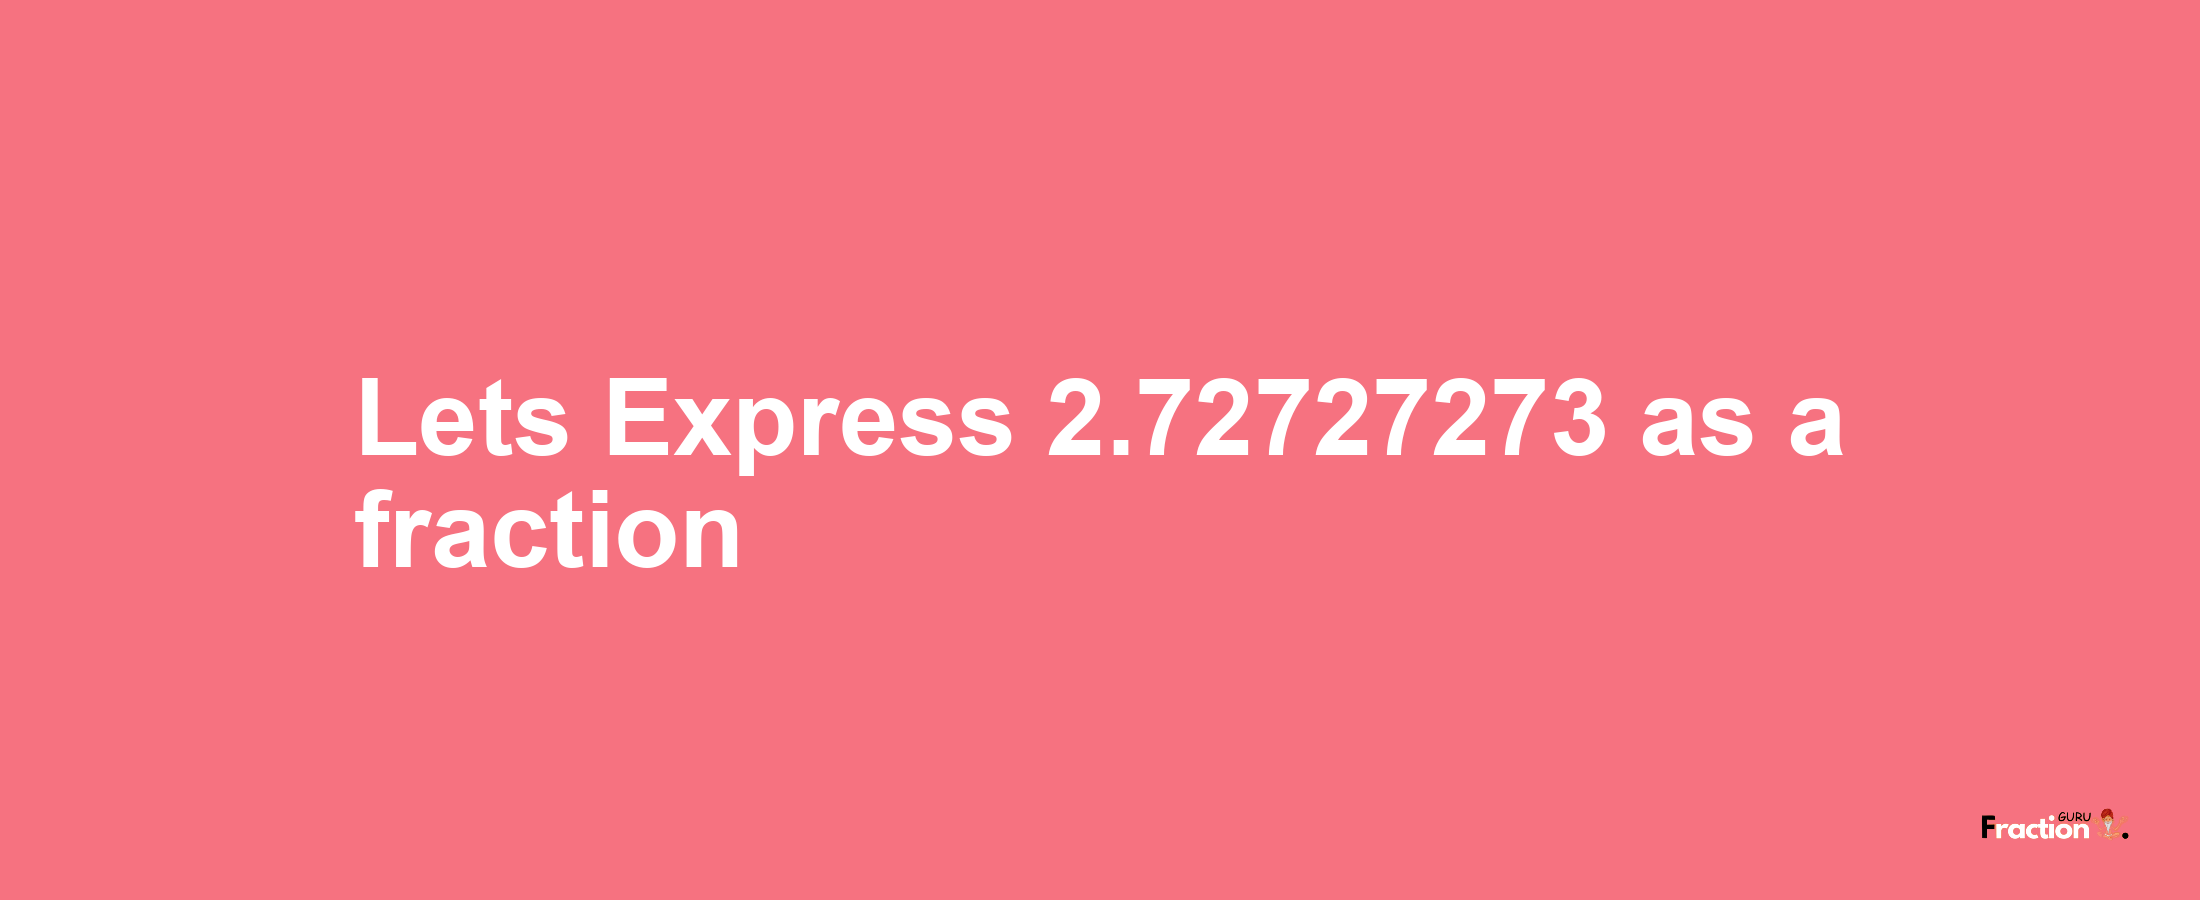 Lets Express 2.72727273 as afraction